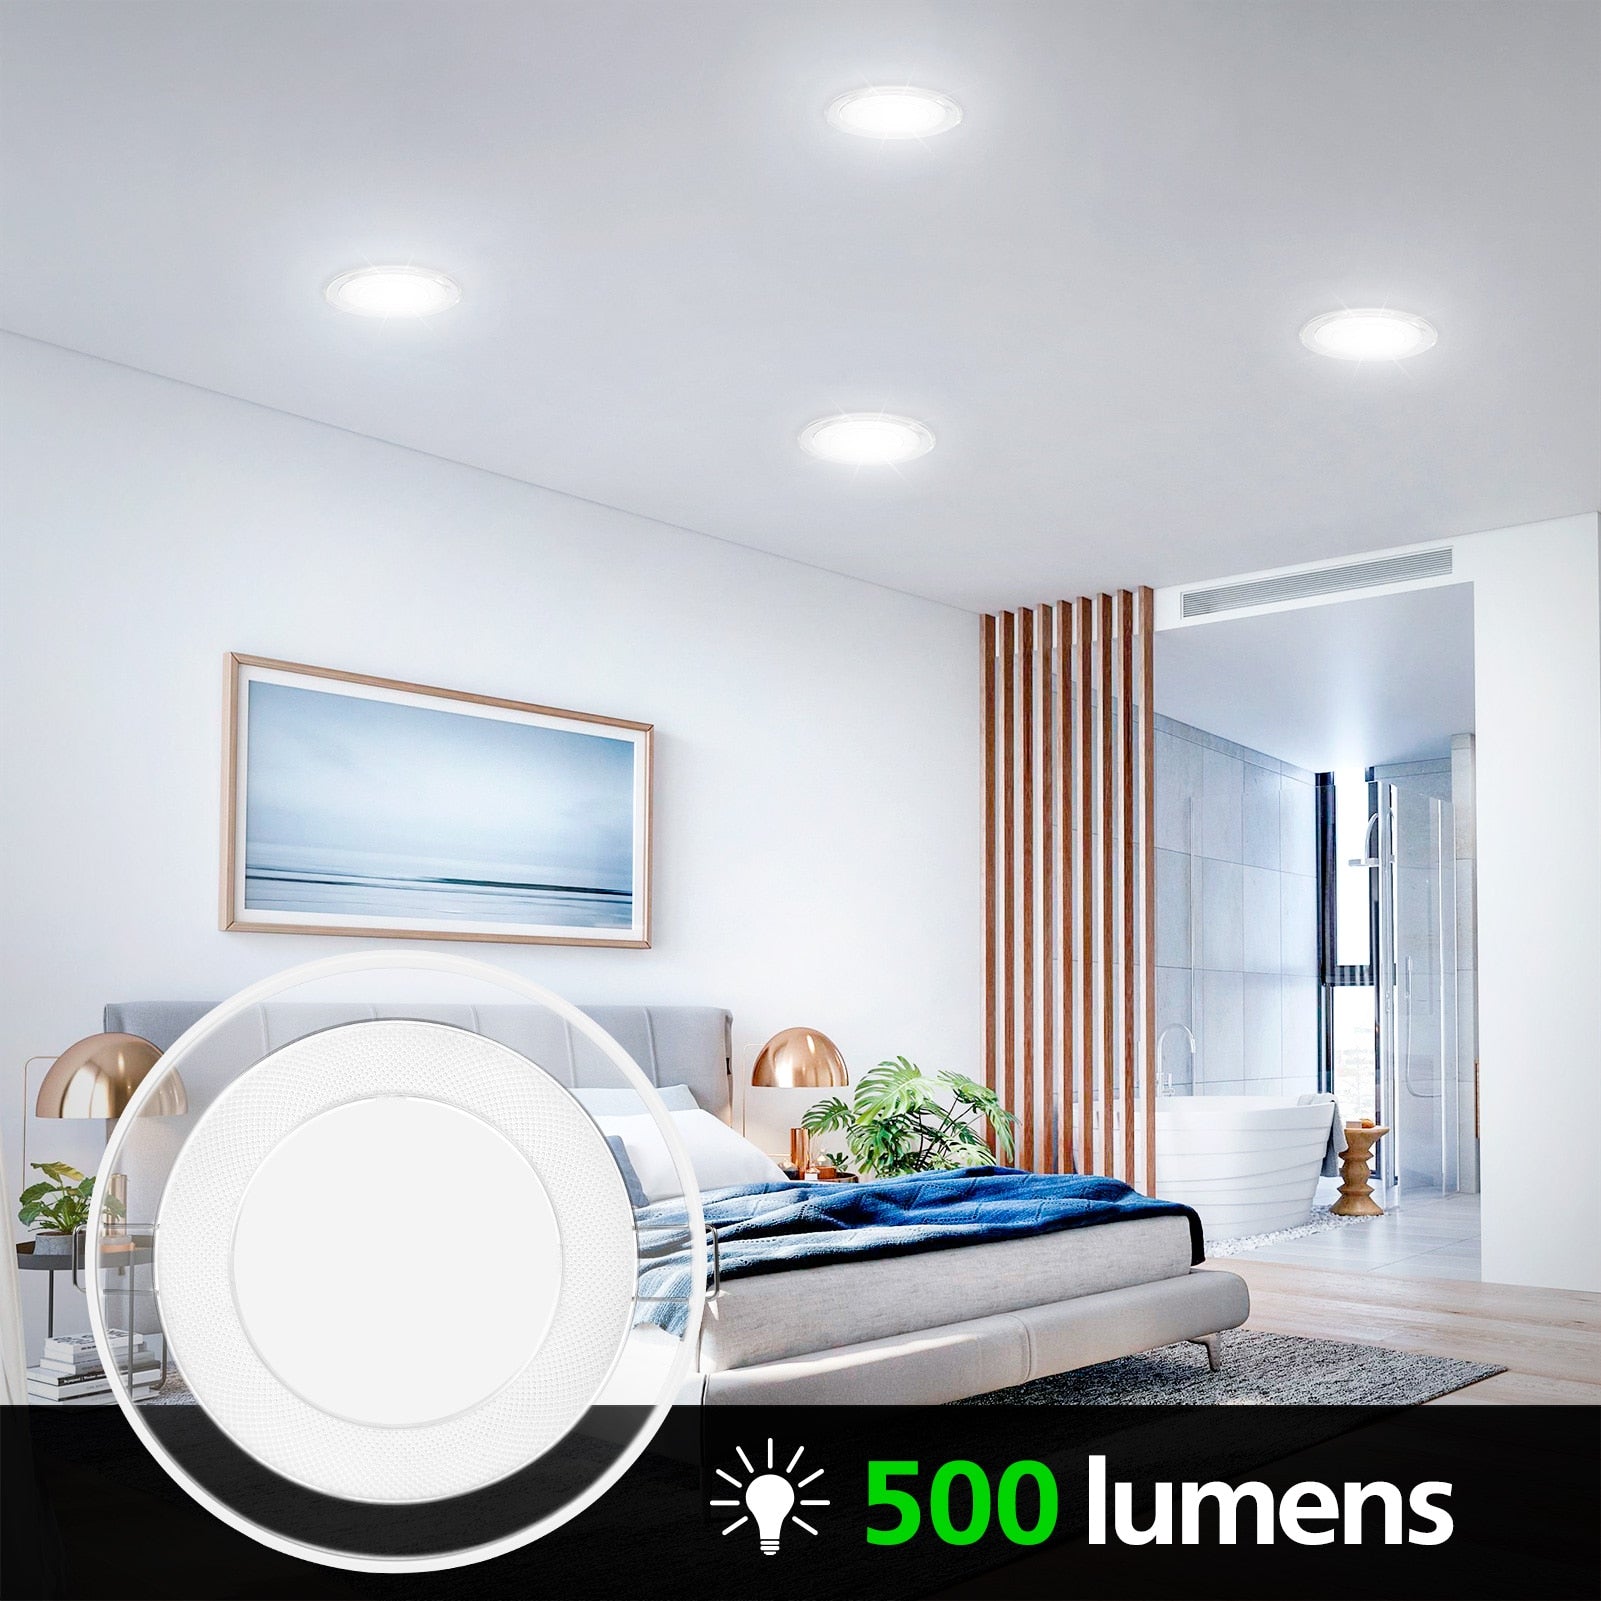 LED Ceiling Light Recessed Ceiling Light No-Flicker 500LM LED Downlight Round Lighting for Bedrooms Offices Restaurants Shopping